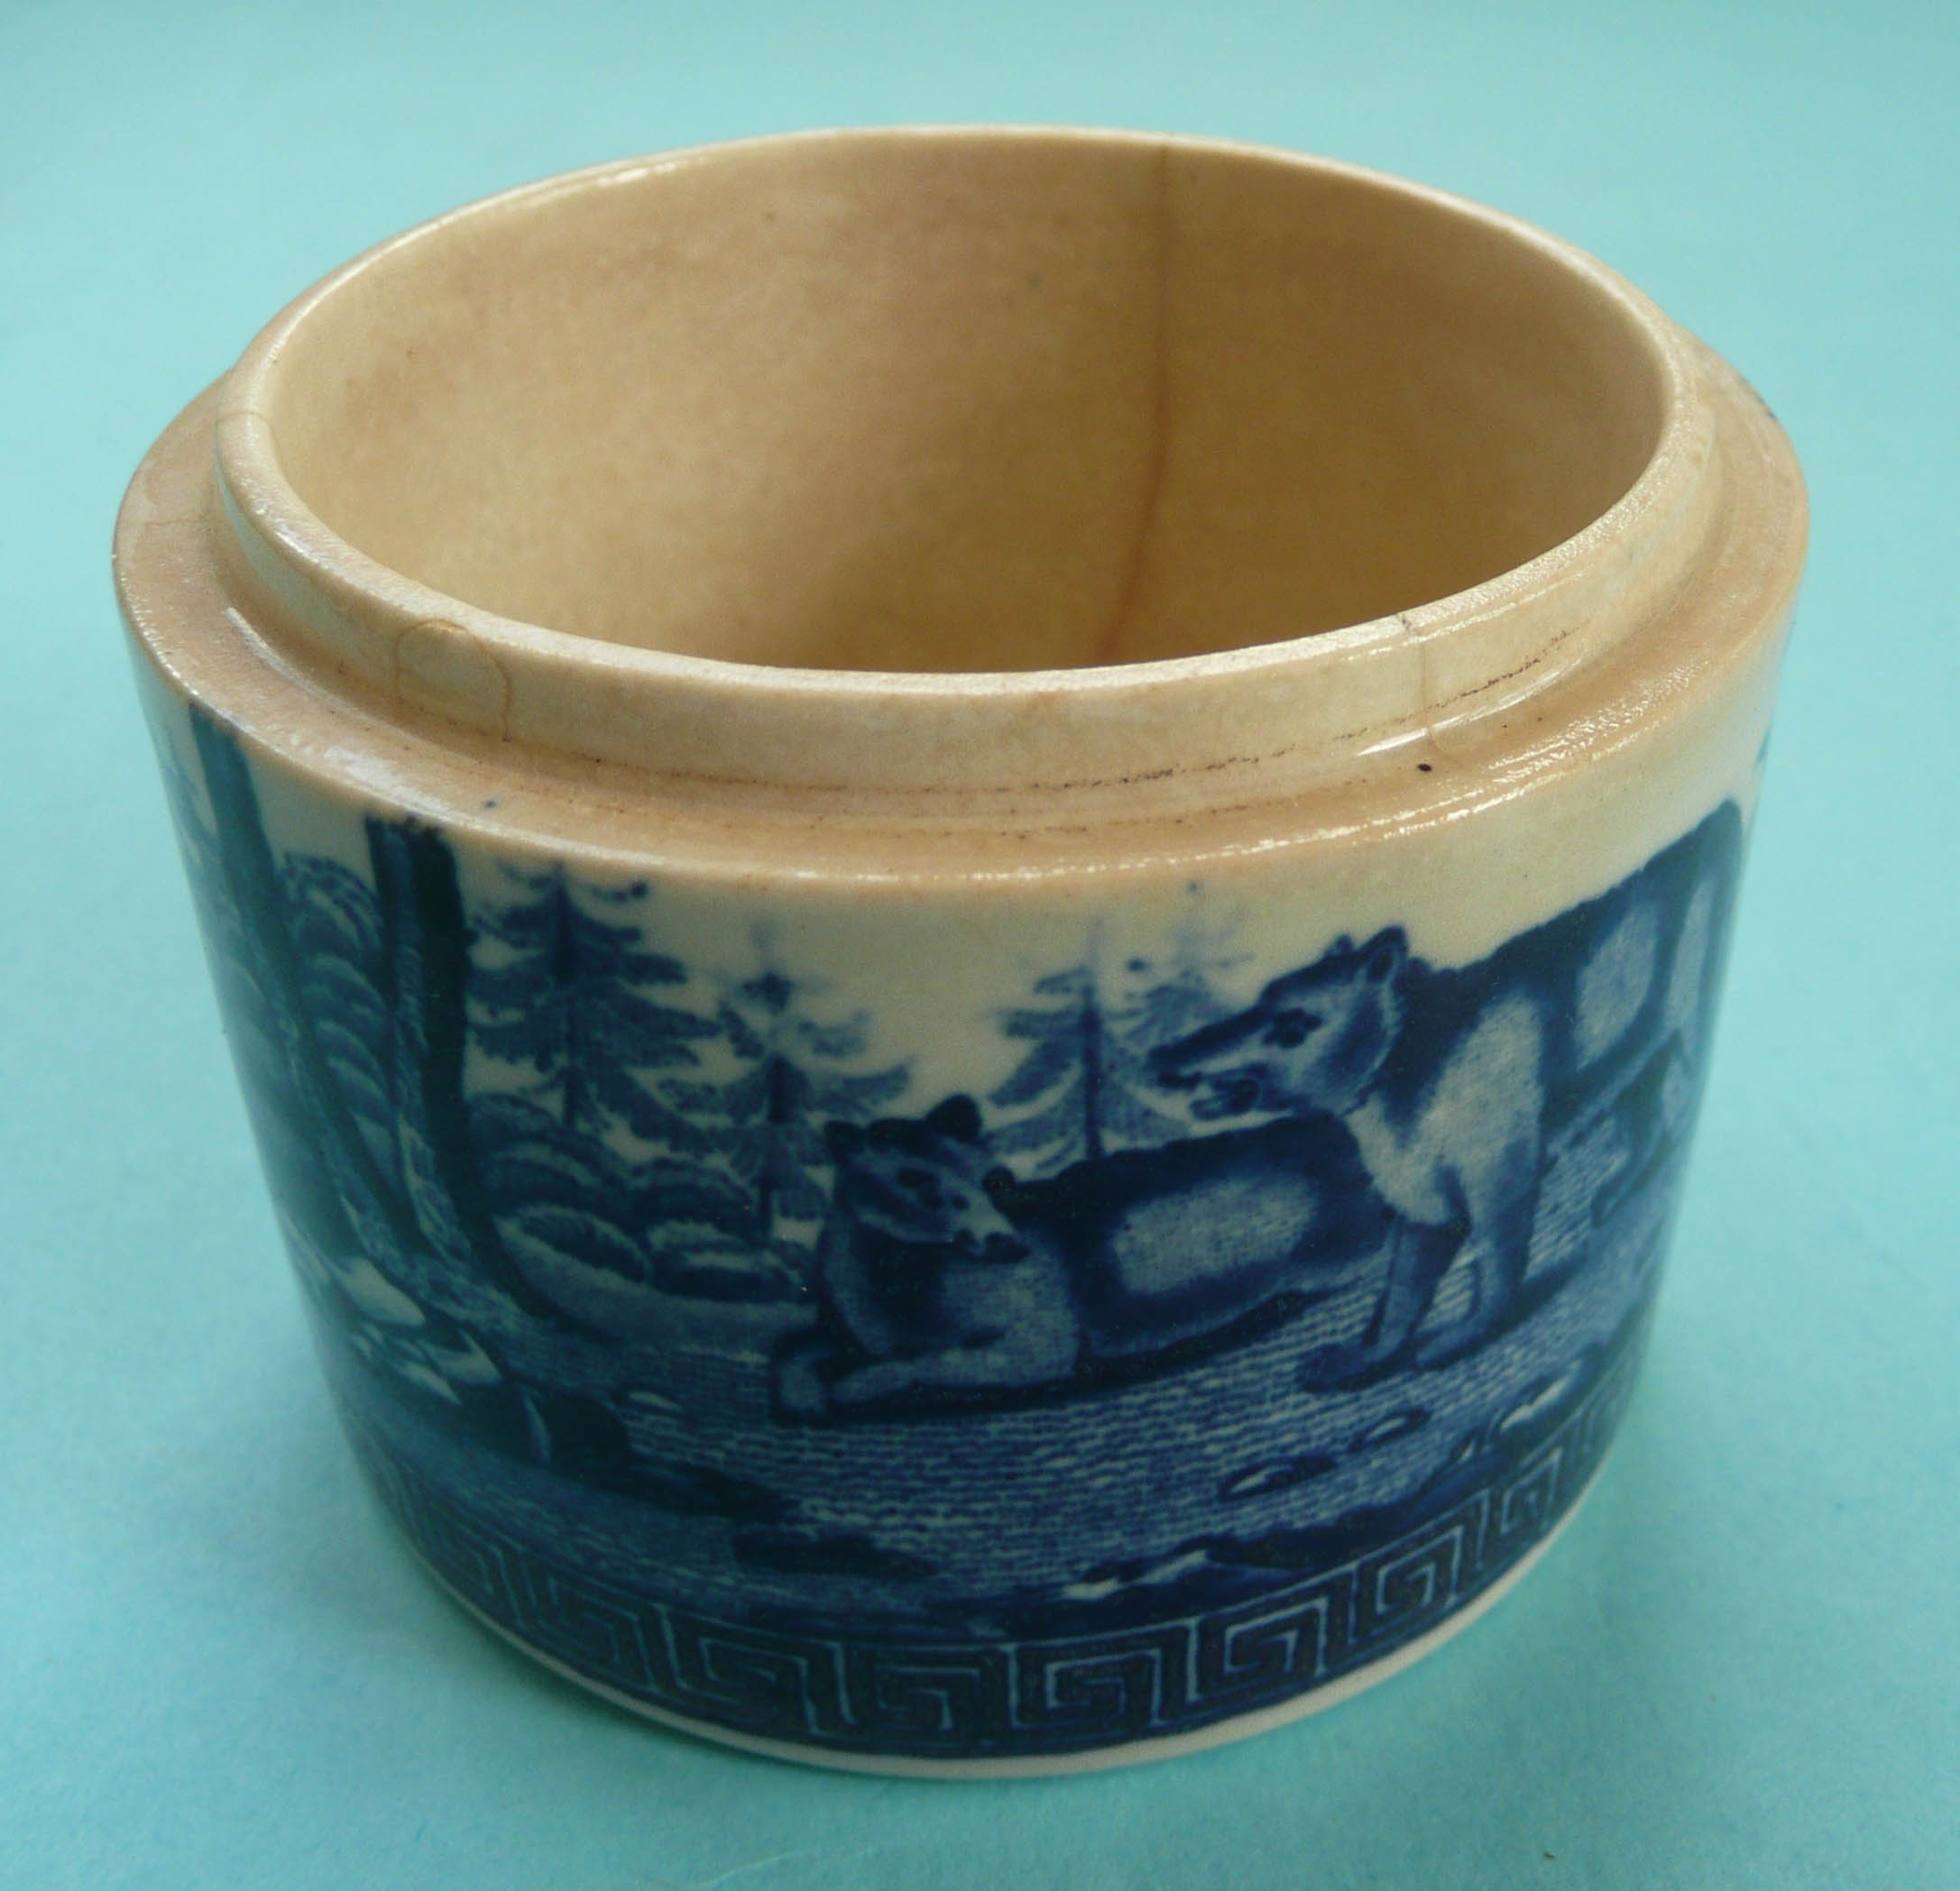 (Pot lid potlid Prattware advertising) A base printed in blue with bears in a wooded landscape, 70mm - Image 2 of 3